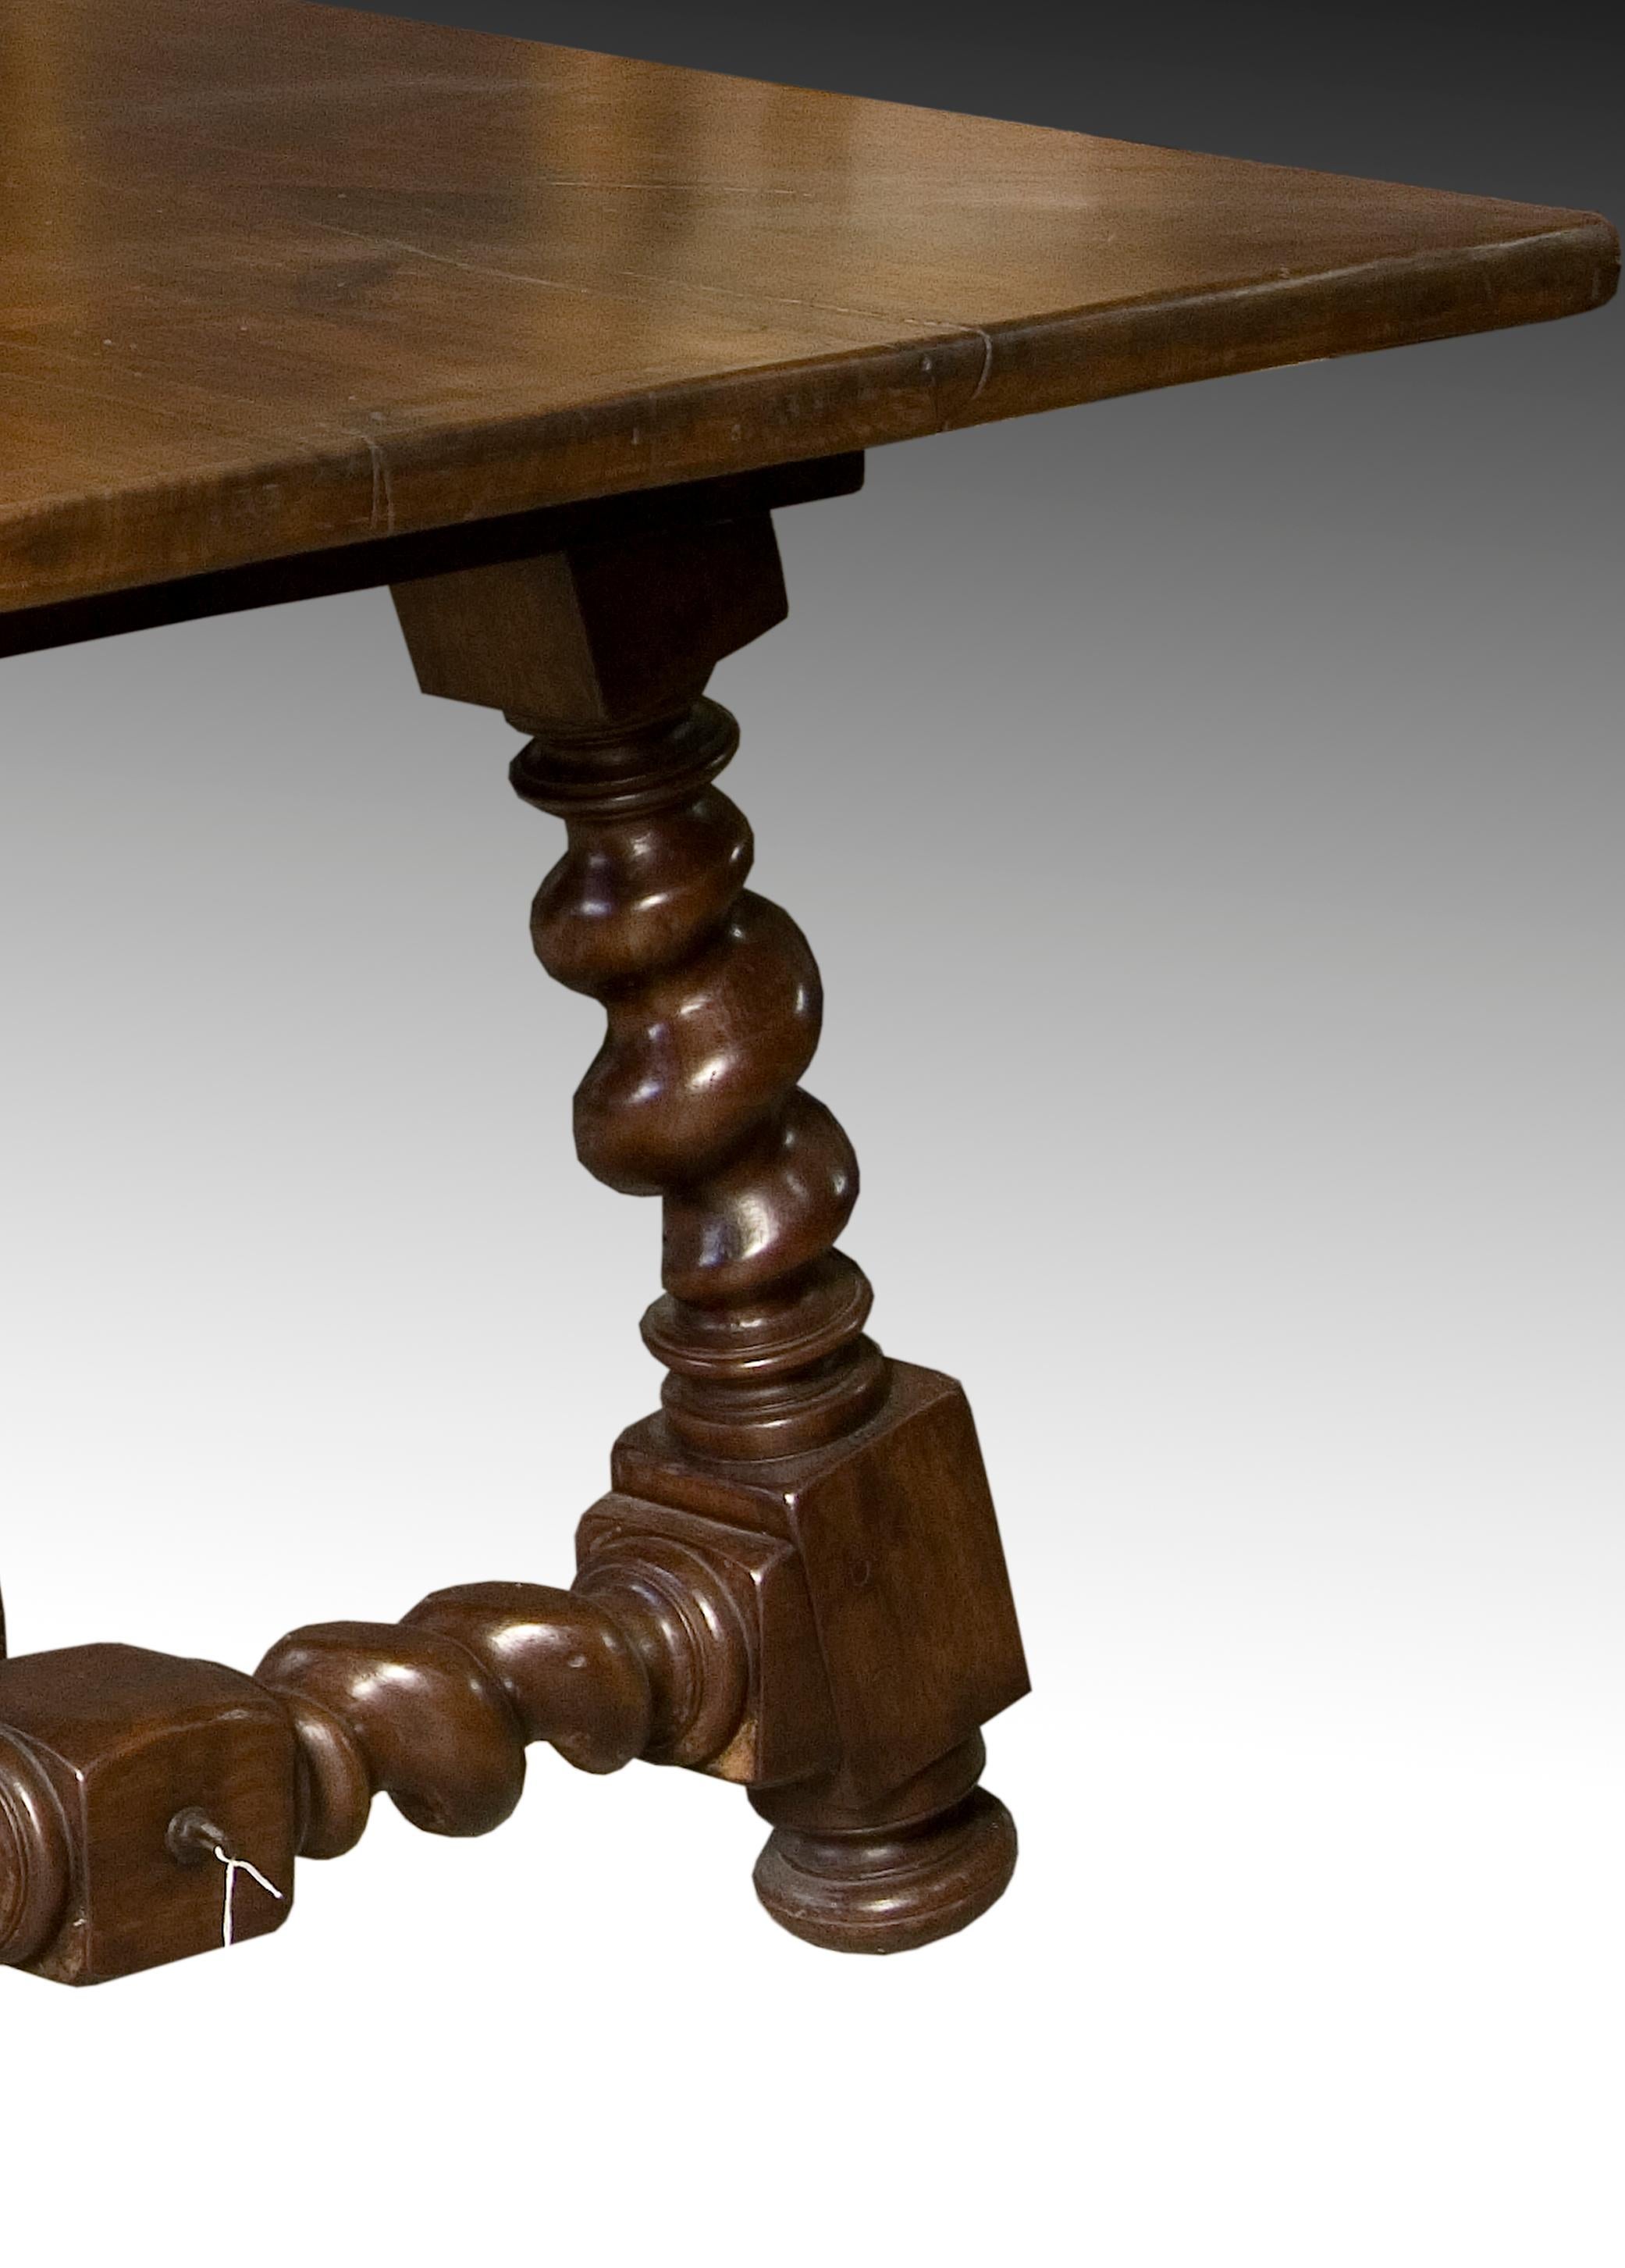 Baroque Revival Dining Room Walnut Table with Solomonic Legs, 20th Century